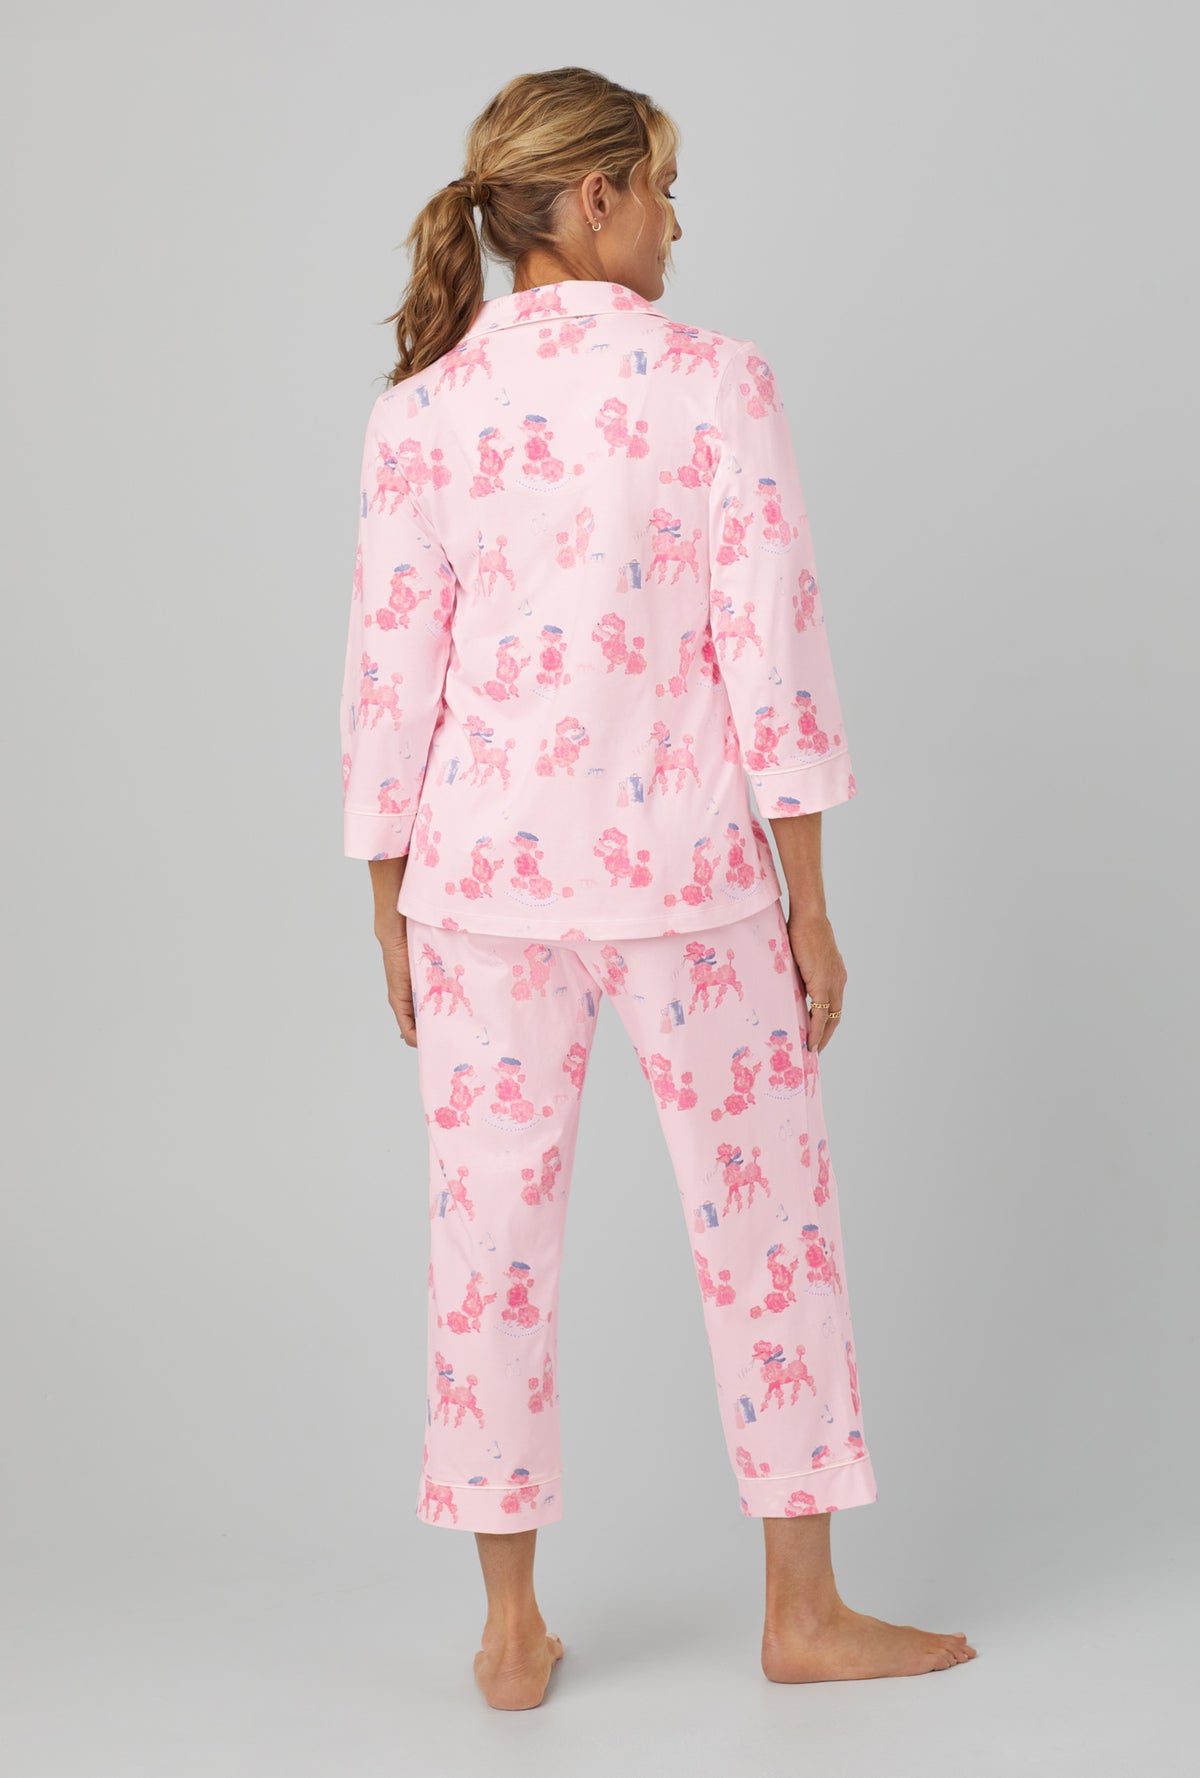 A lady wearing Pink 3/4 Sleeve Classic Stretch Jersey Cropped PJ Set with Pampered Poodles  print